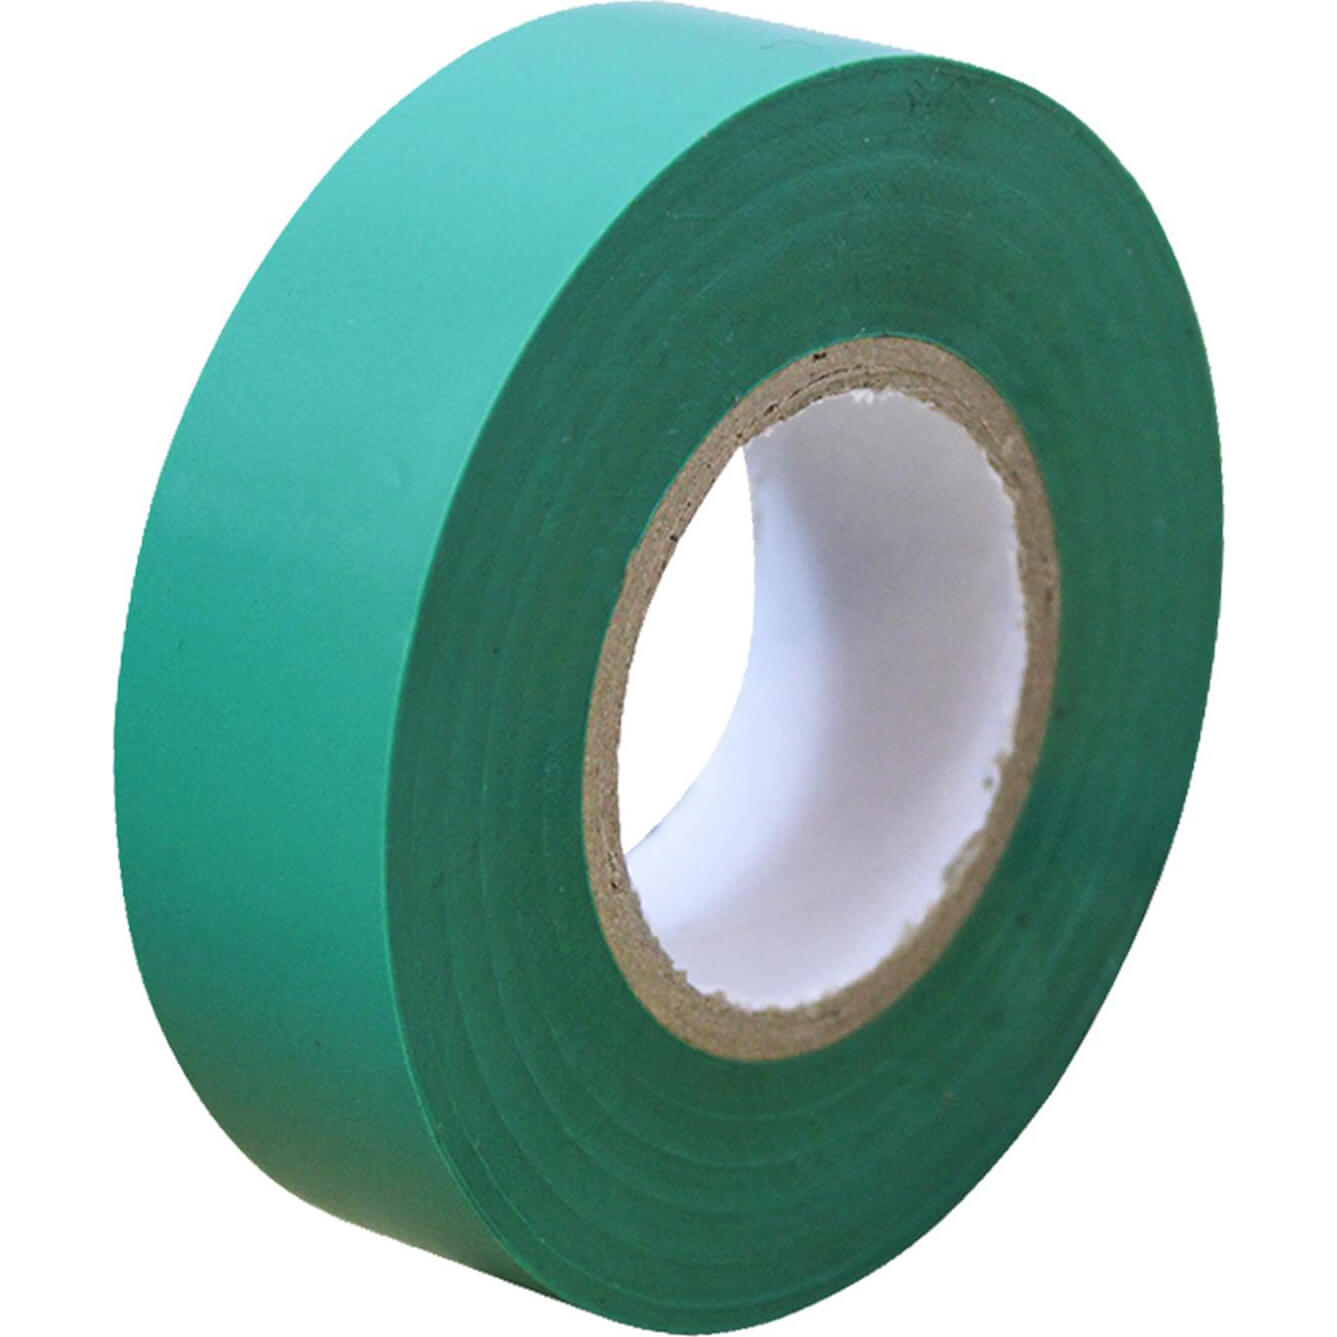 Image of Sirius Electrians PVC Insulation Tape Green 19mm 33m